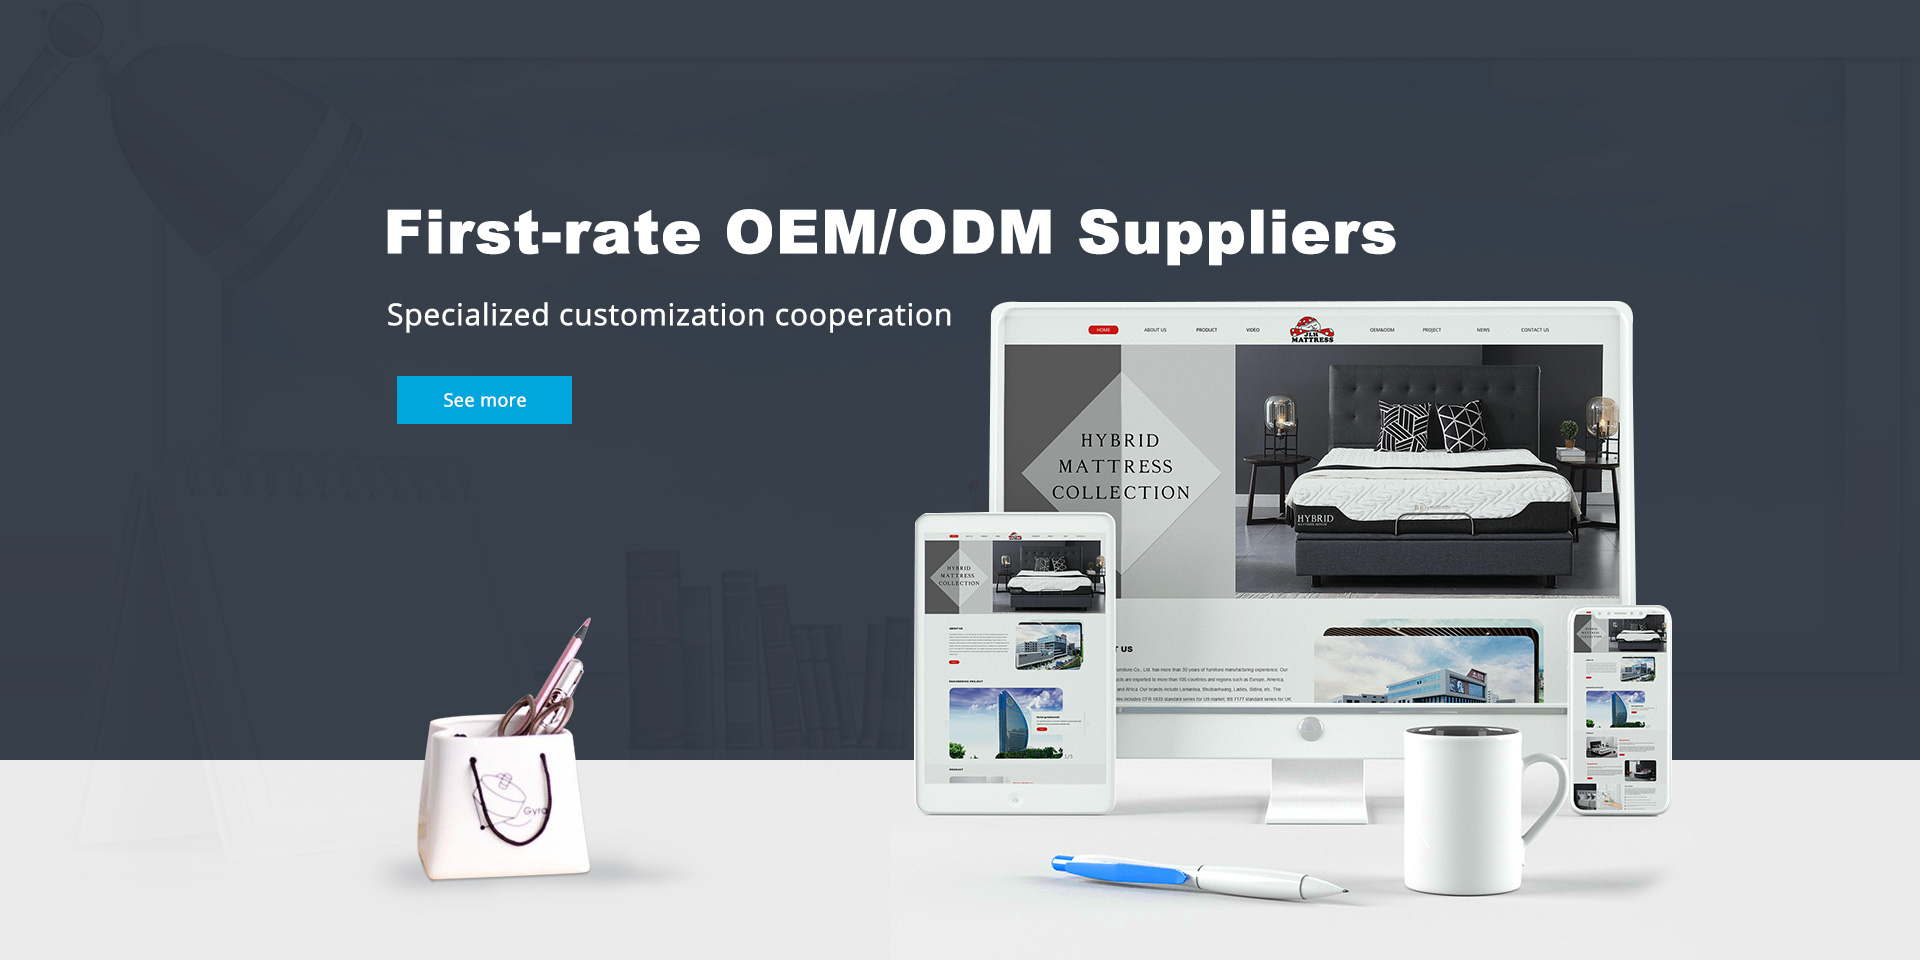 First-rate OEM/ODM Suppliers